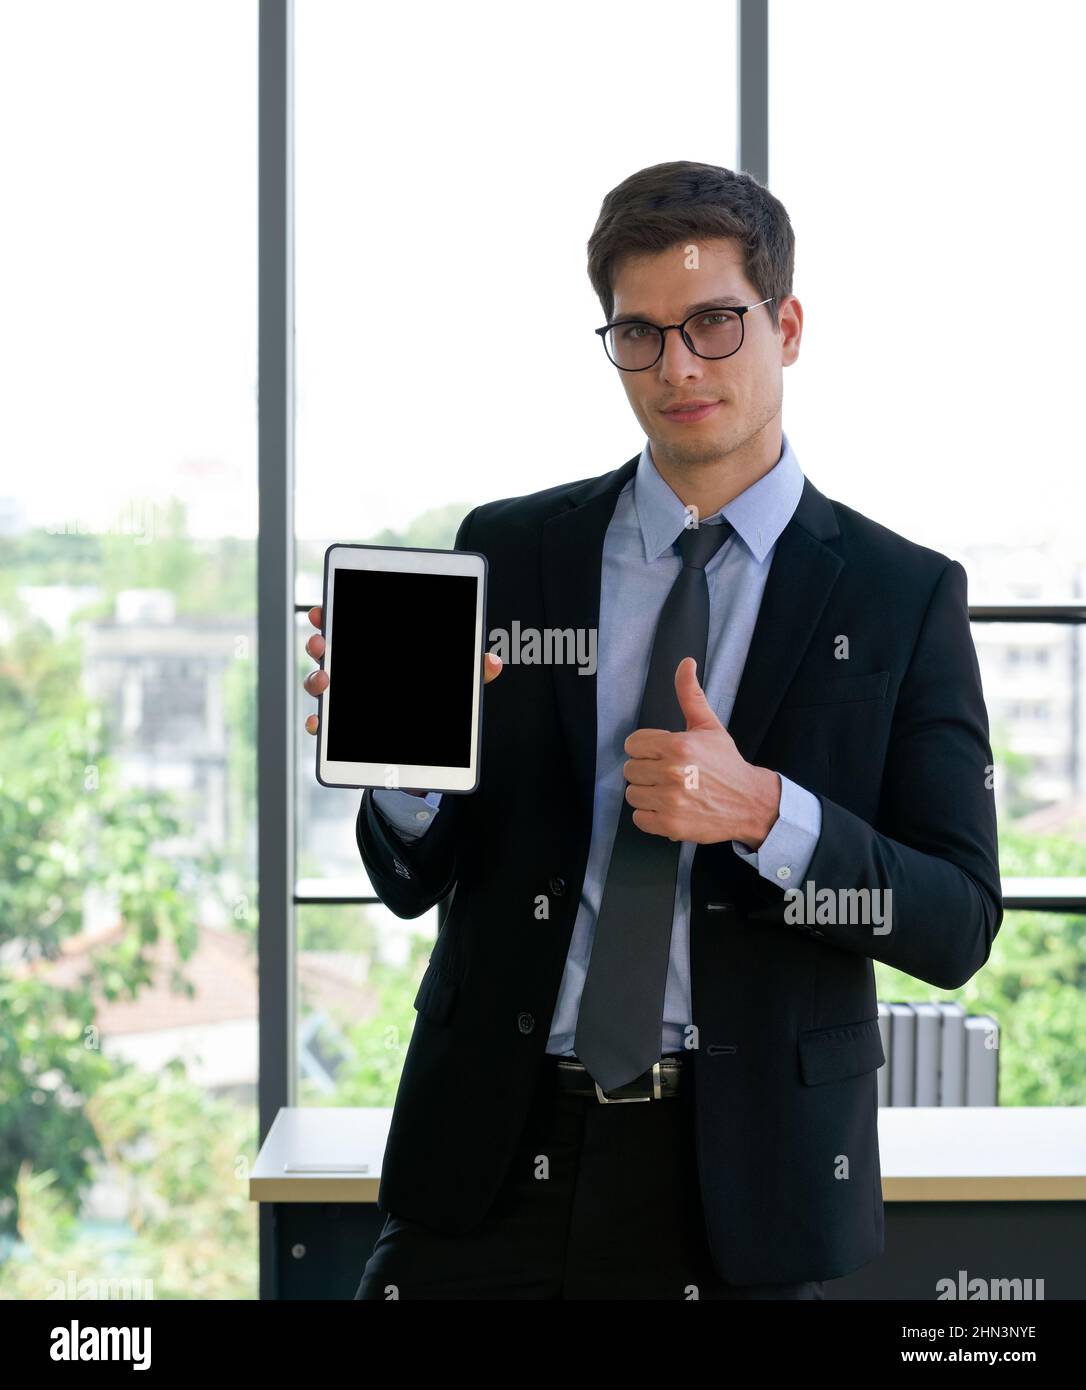 Business people in suits and ties raise finger thumbs up while holding blank screen tablet computer. Morning work atmosphere in a modern office. Stock Photo